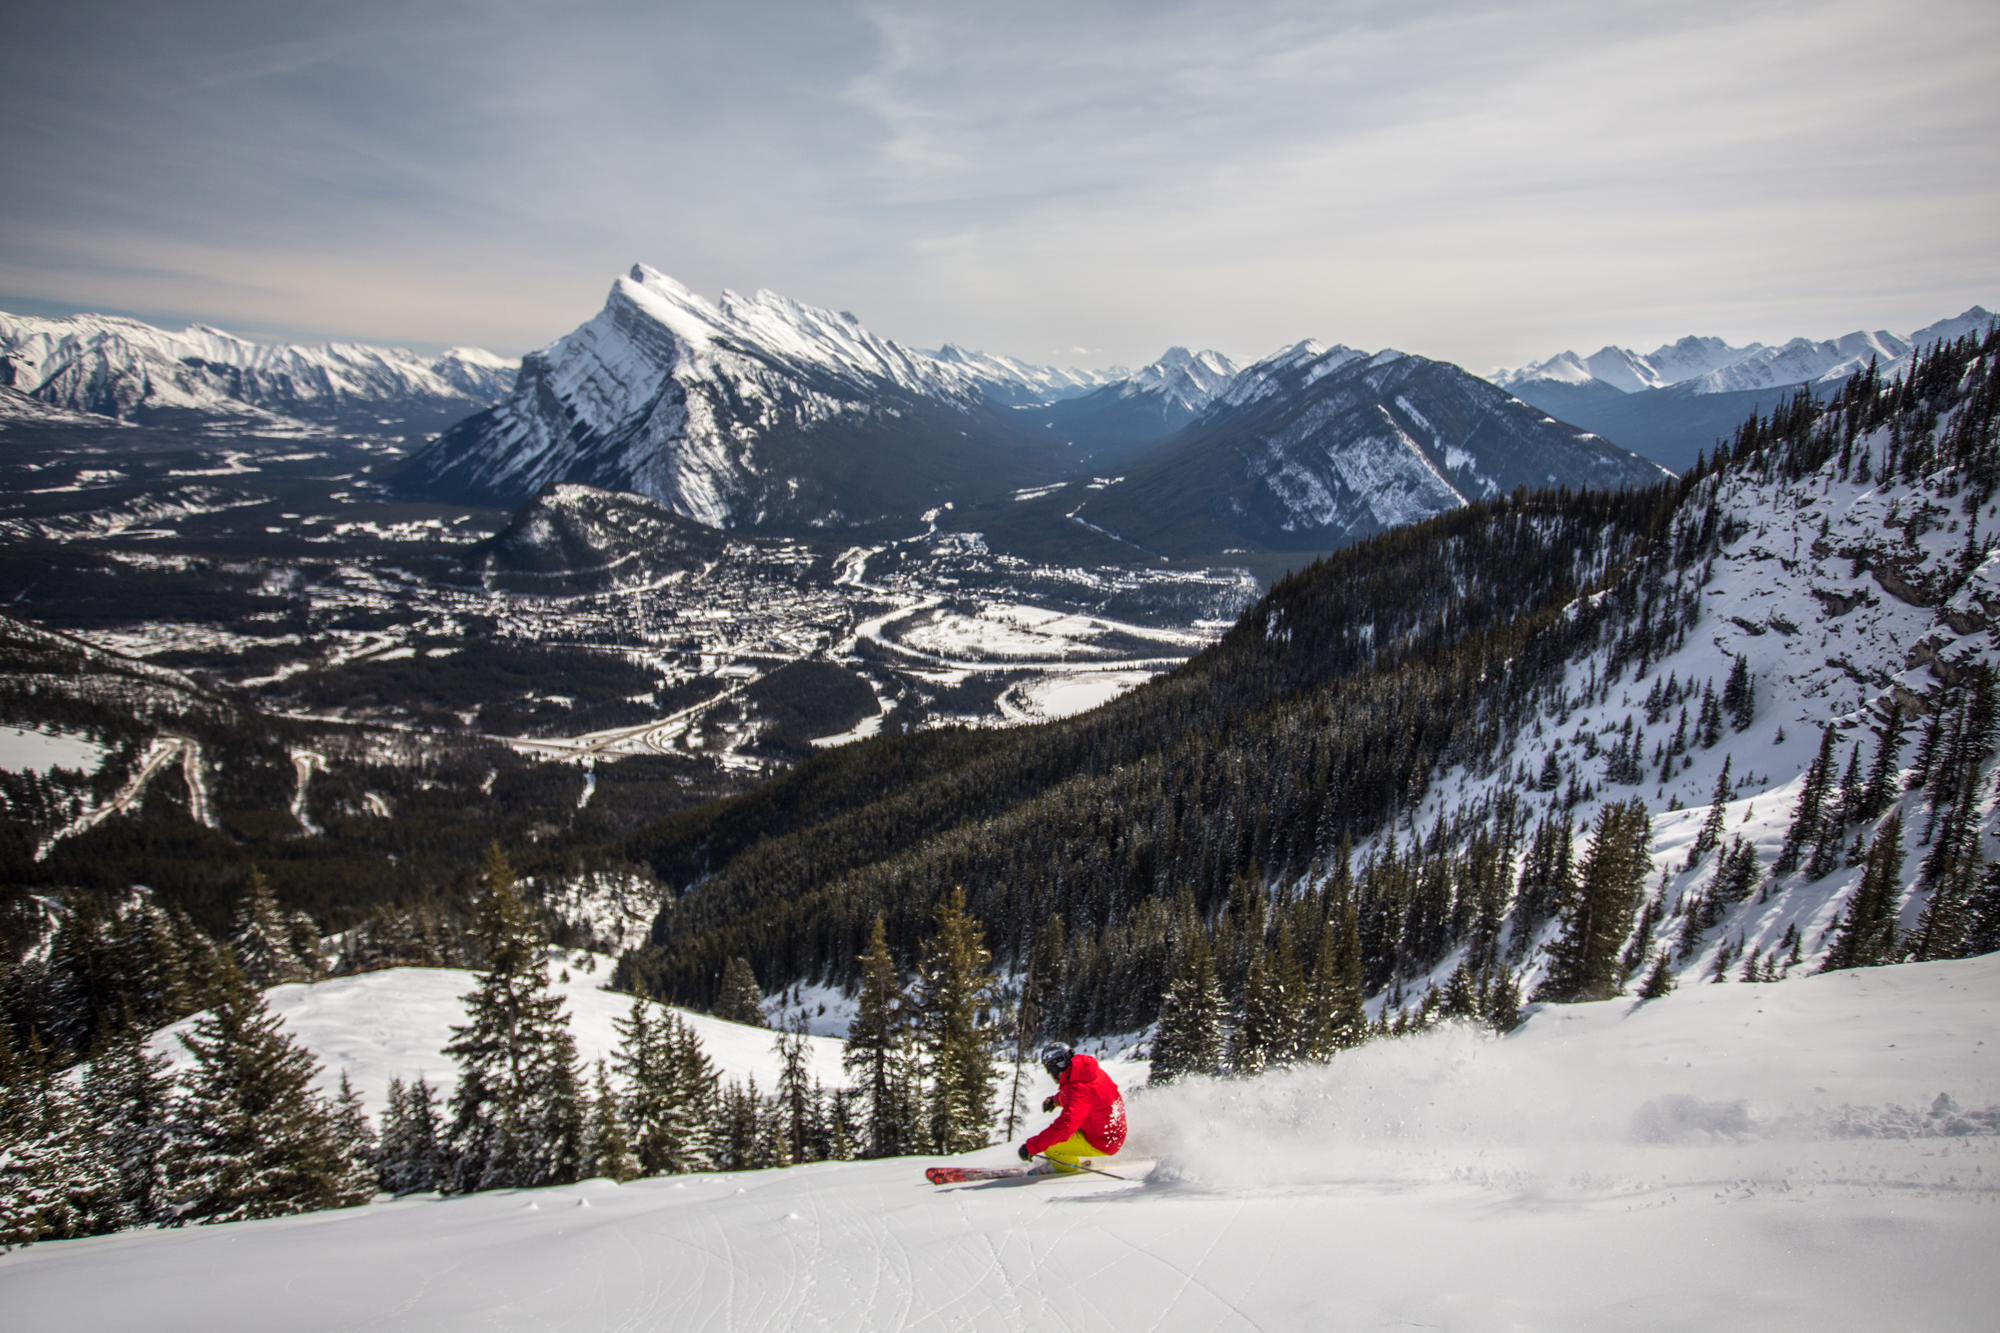 SkiBig3 Tips: Guide to Lake Louise in Winter – SkiBig3